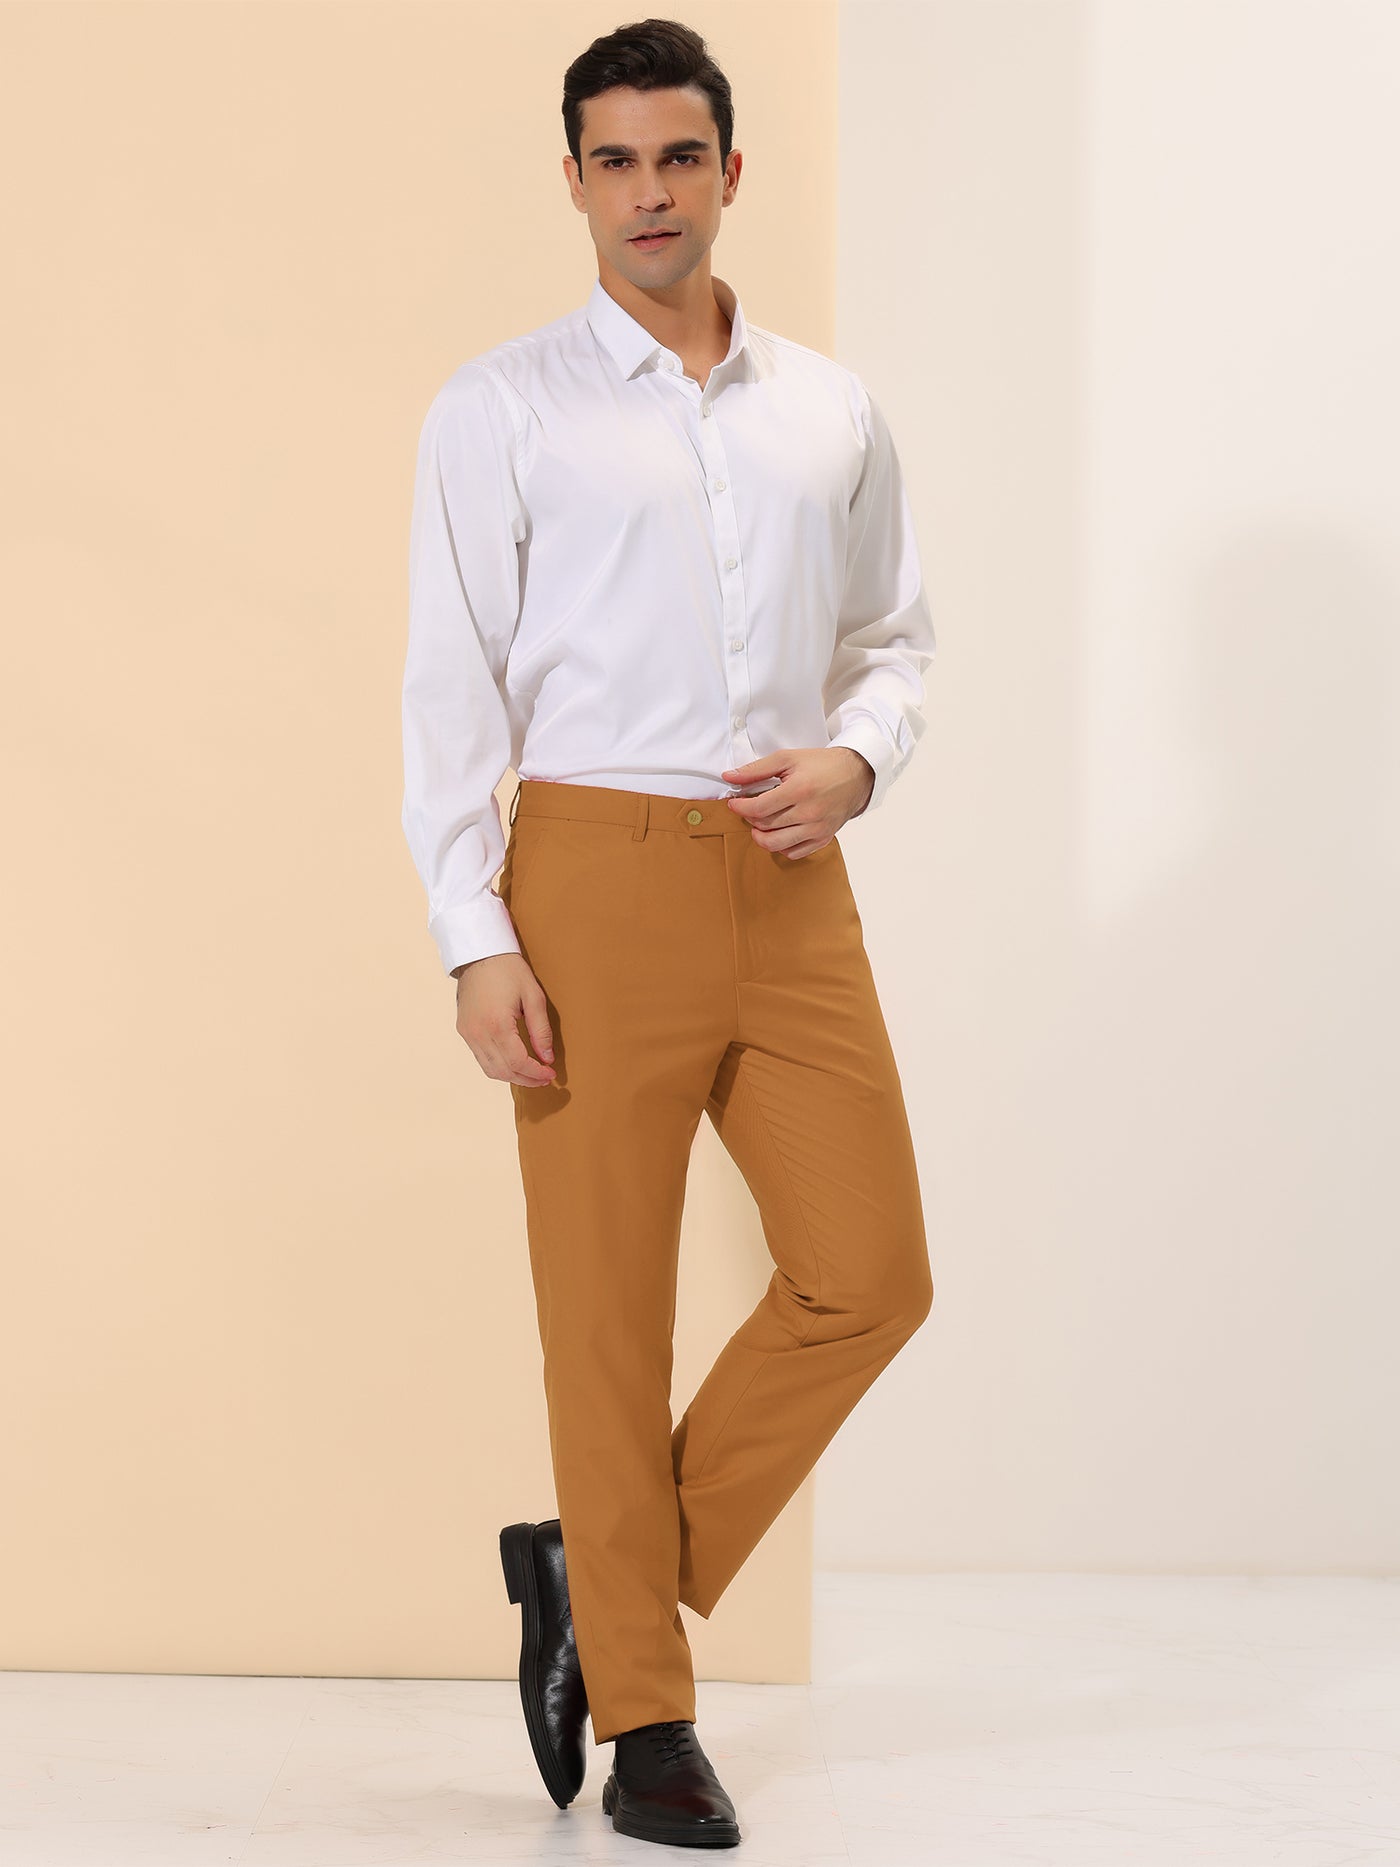 Bublédon Men's Casual Straight Fit Comfort Stretch Flat Front Chino Pants